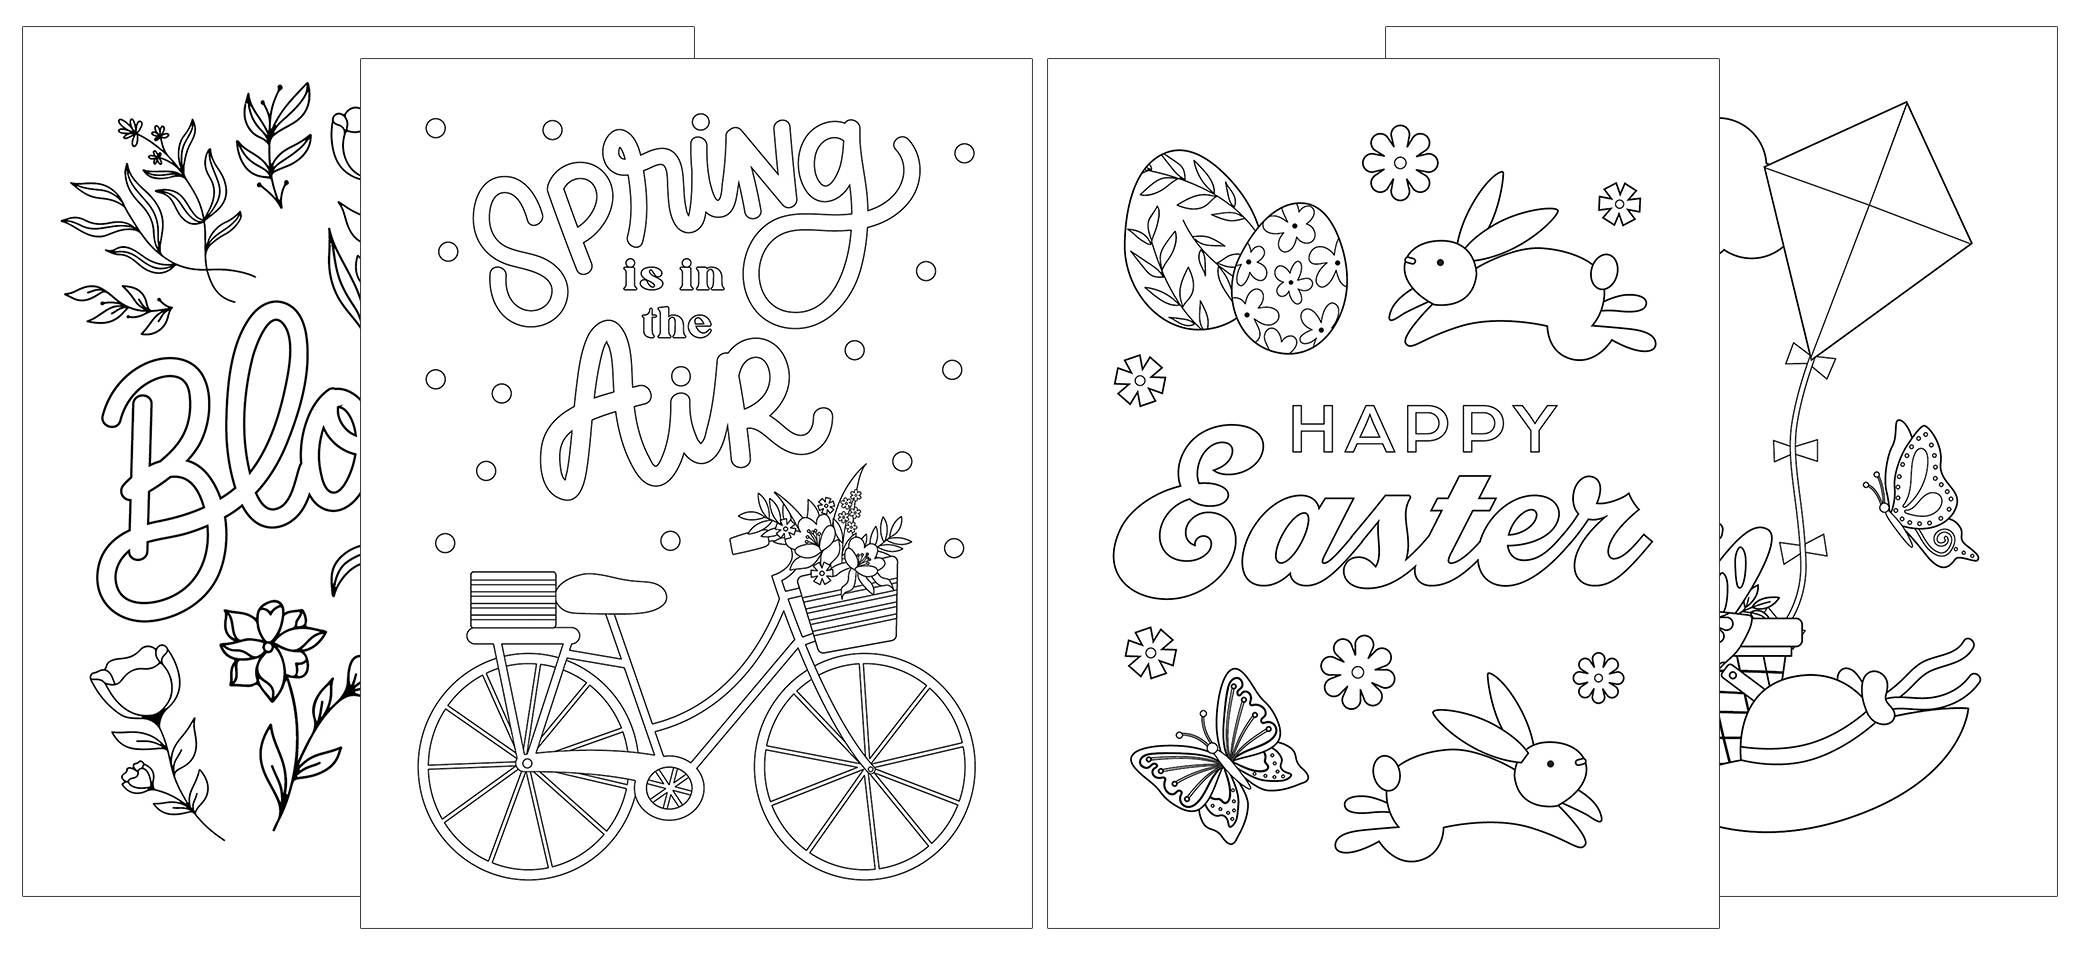 Want more happy coloring pages â the happy planner